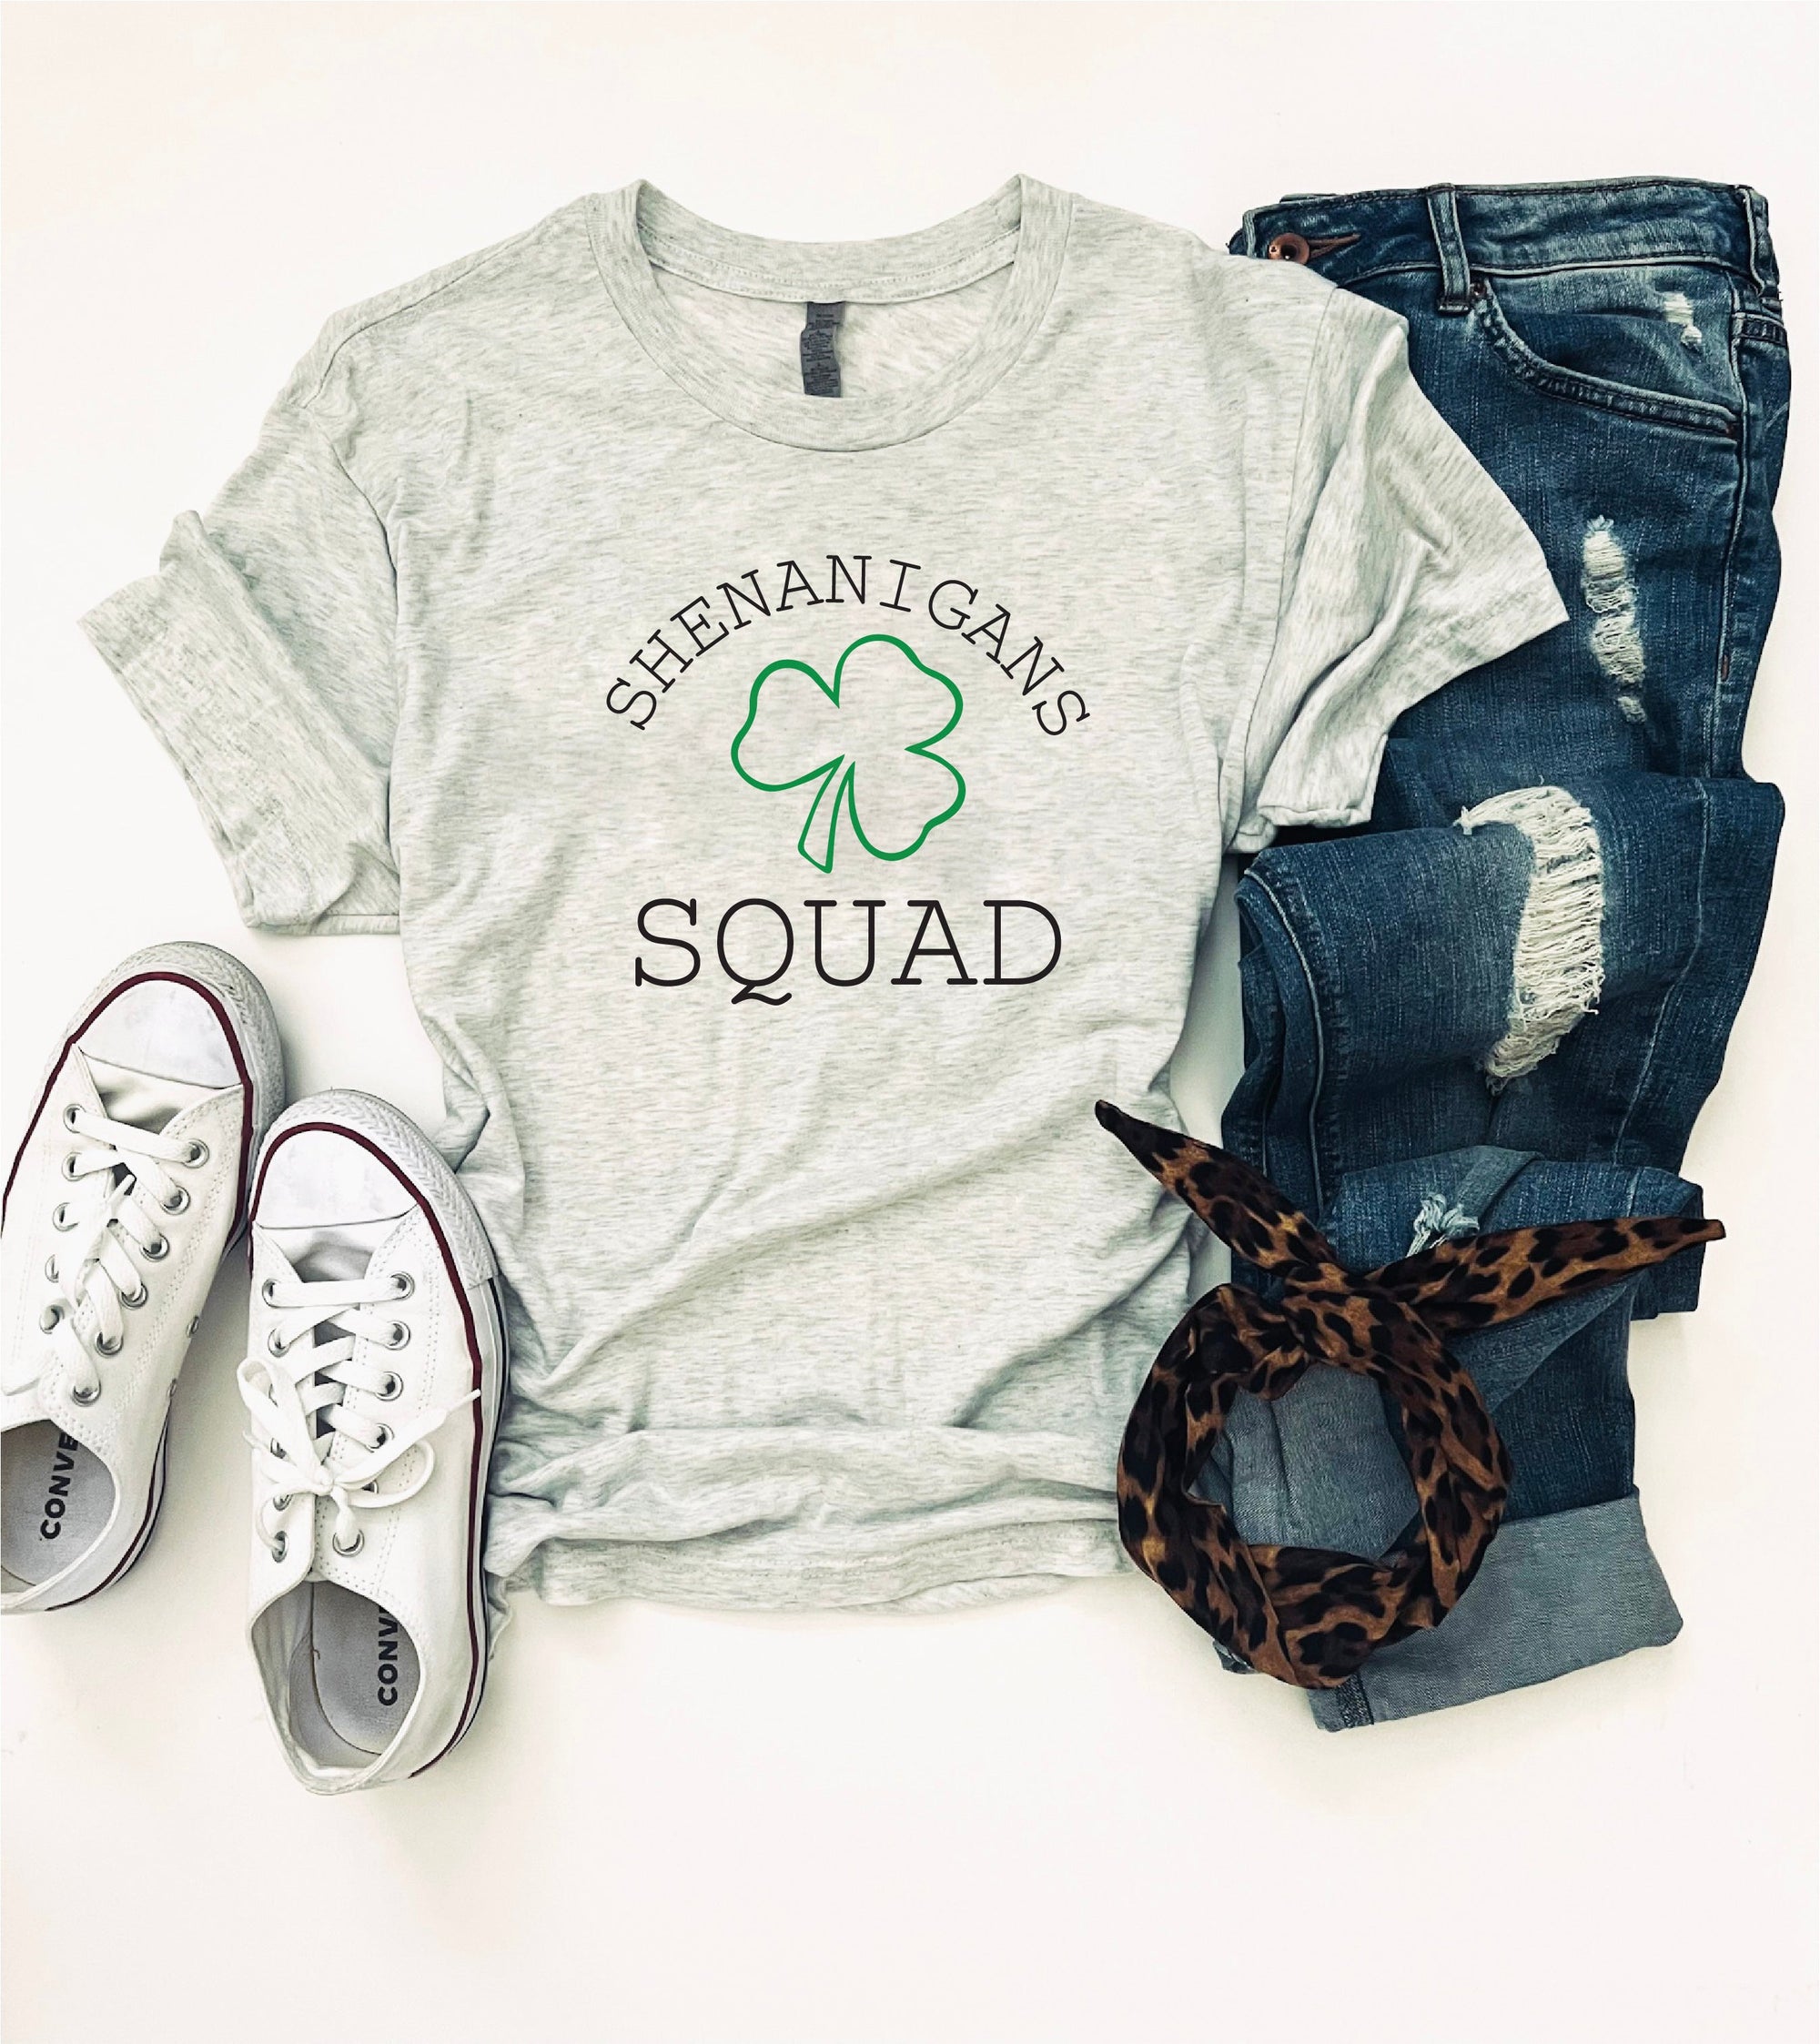 Shenanigans squad tee Short sleeve St patty day tee Bella canvas 3001 